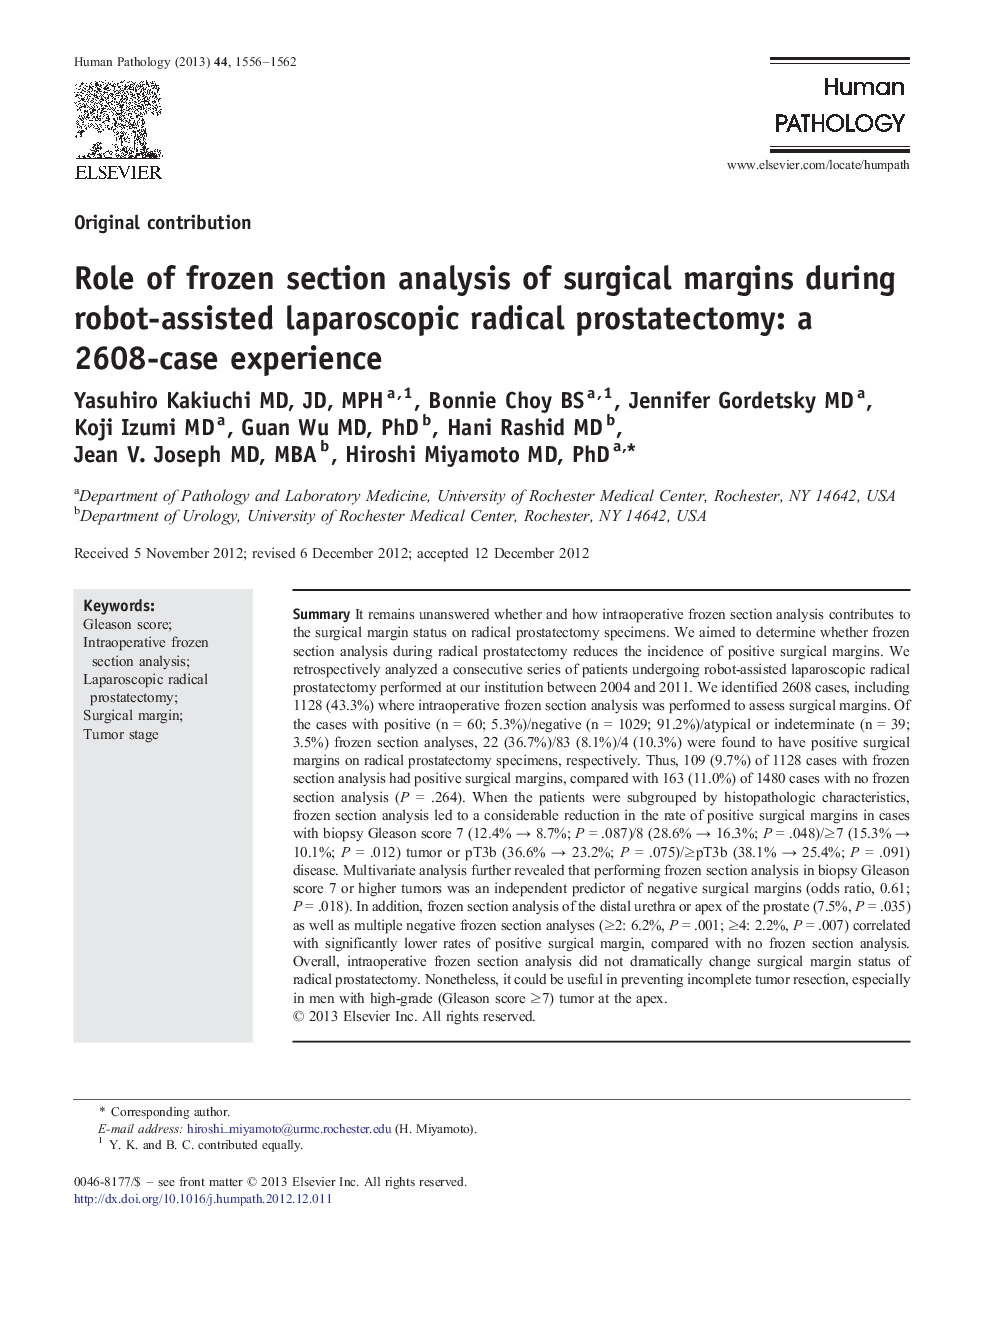 Role of frozen section analysis of surgical margins during robot-assisted laparoscopic radical prostatectomy: a 2608-case experience